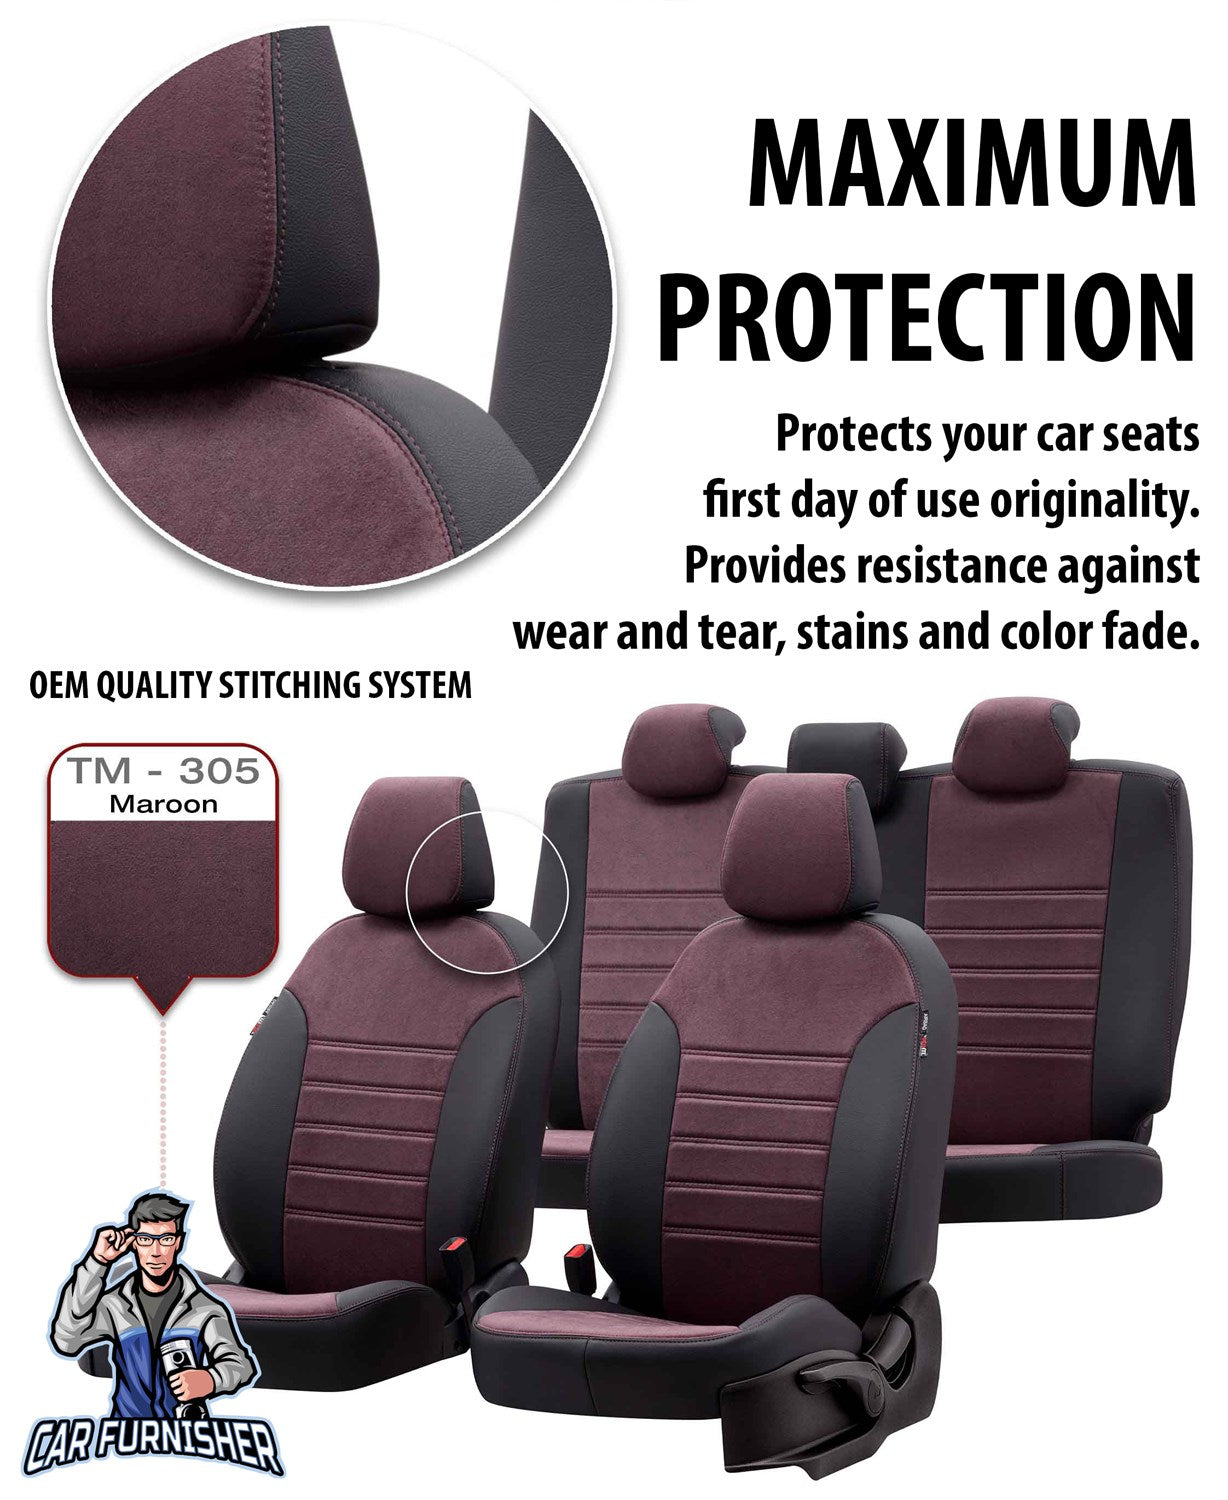 Peugeot 108 Seat Cover Milano Suede Design Burgundy Leather & Suede Fabric